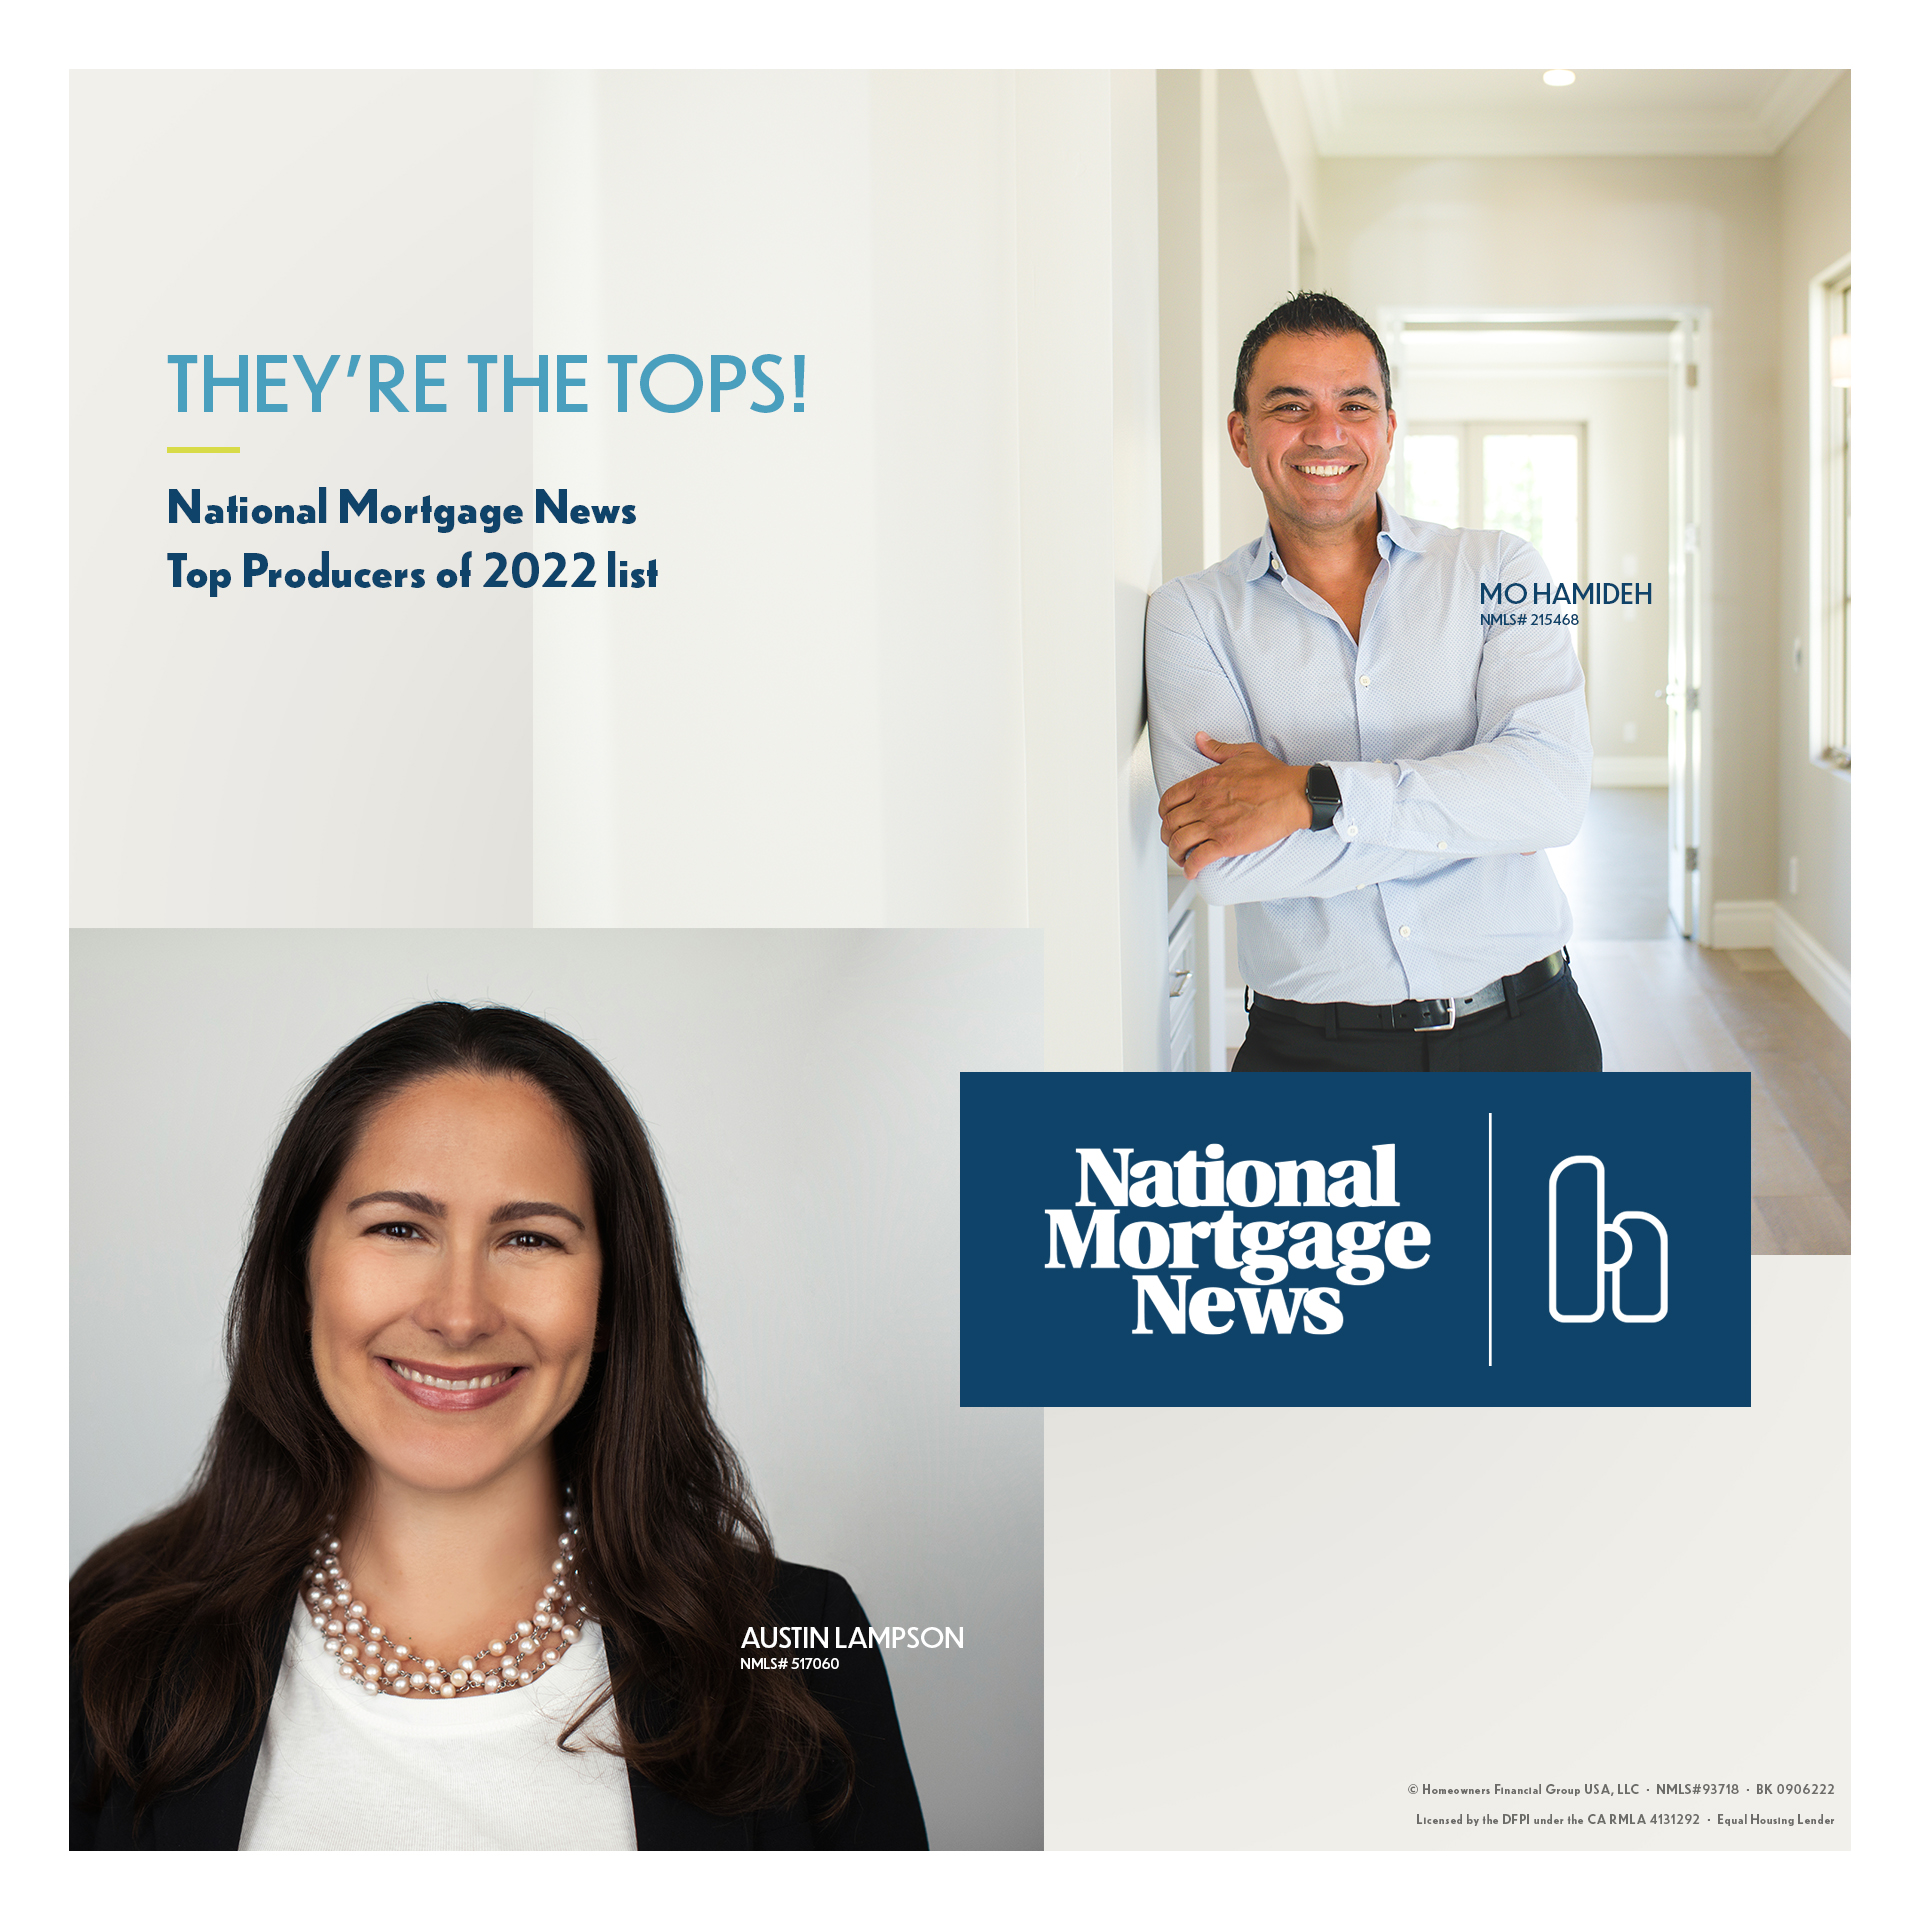 Austin Lampson and Mo Hamideh Named 2022 Top Producers by National Mortgage News